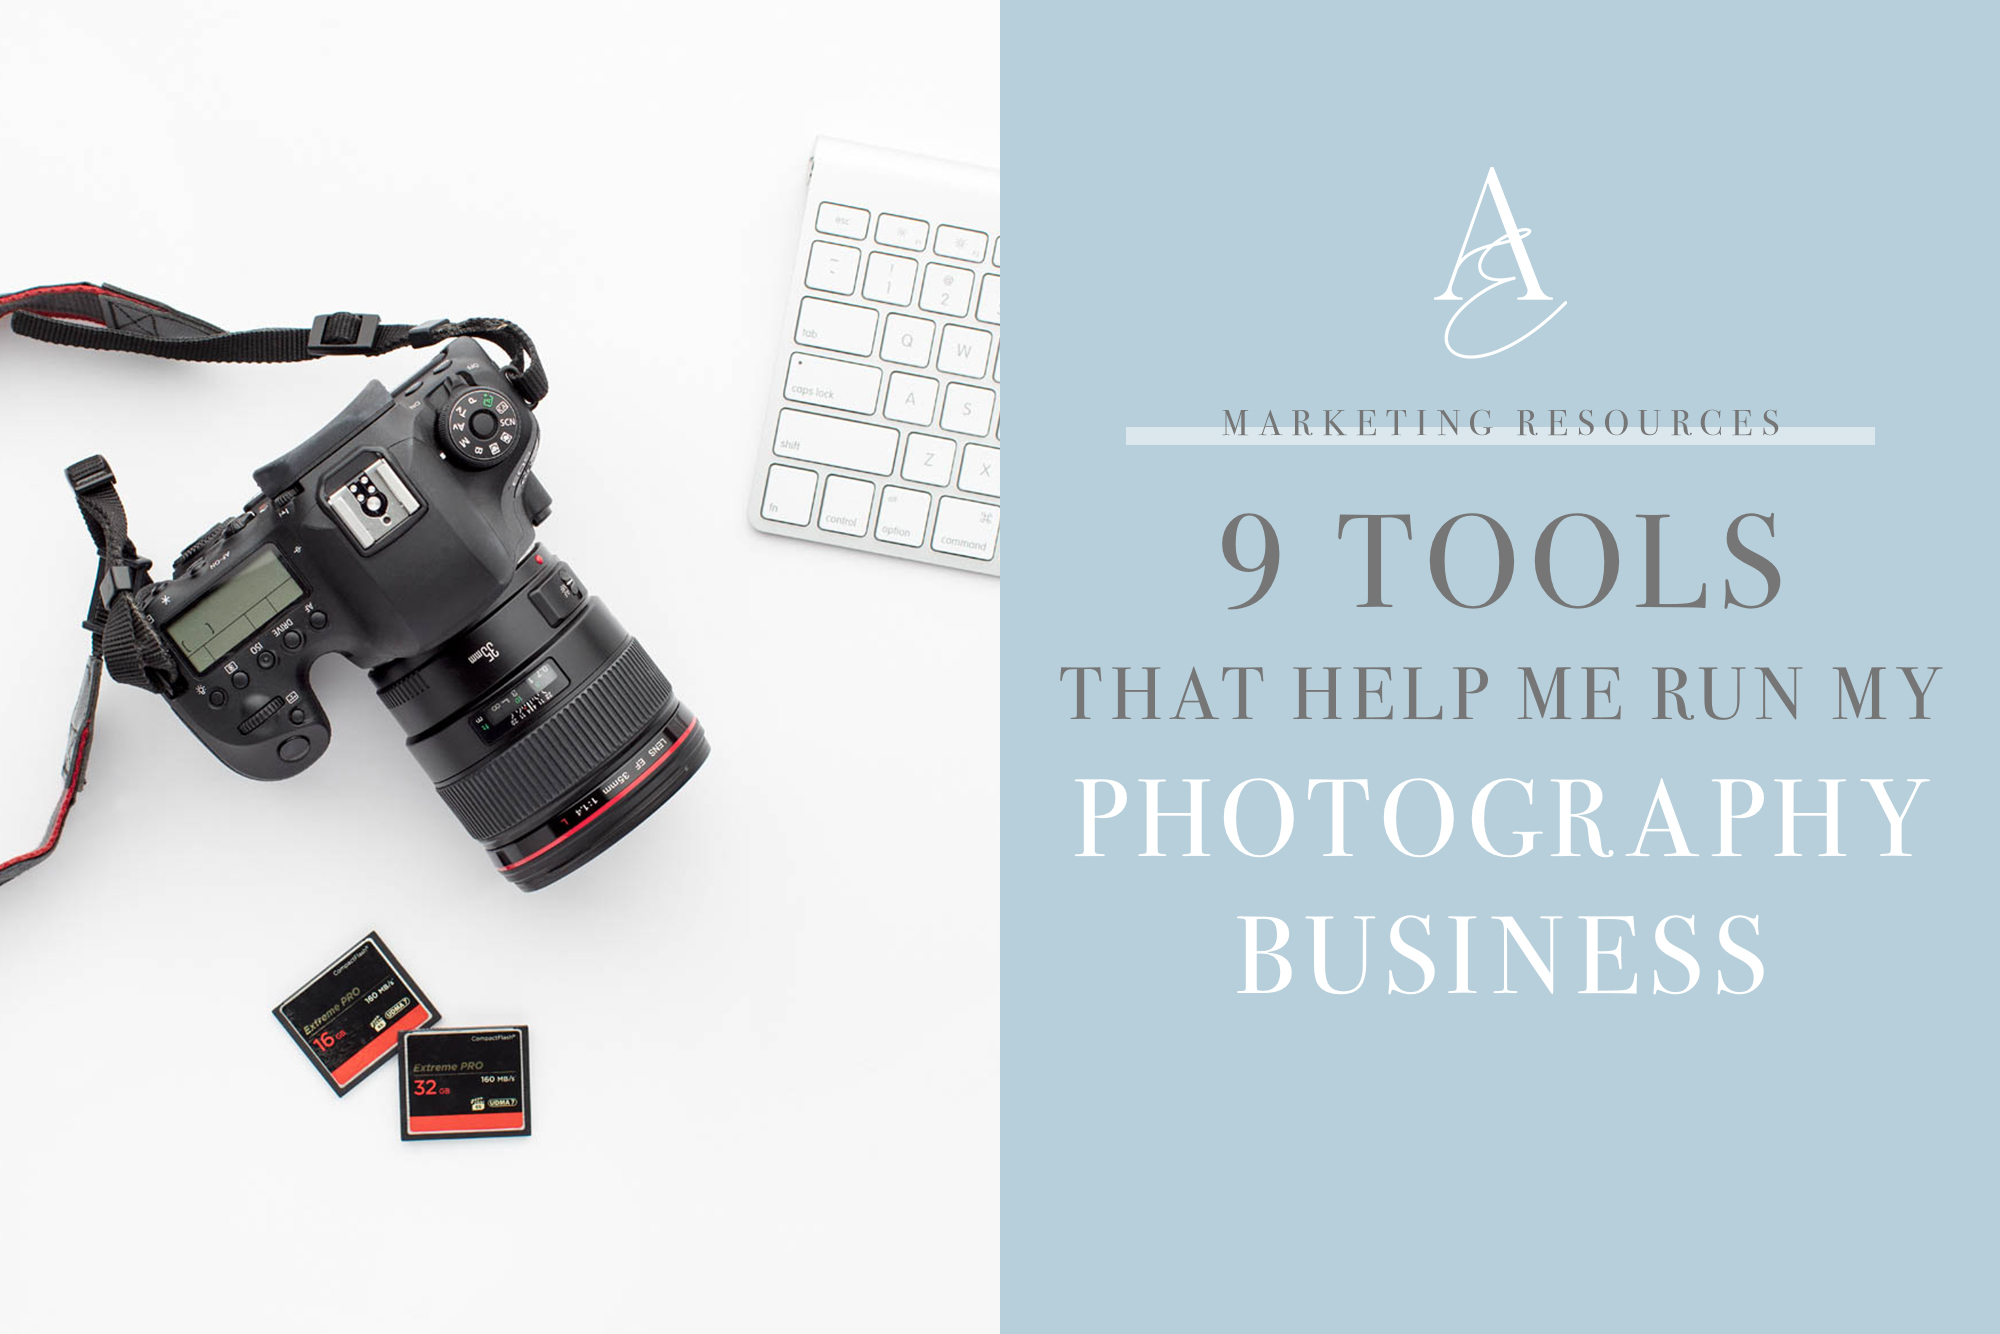 Graphic with camera. 9 tools for photography business's.